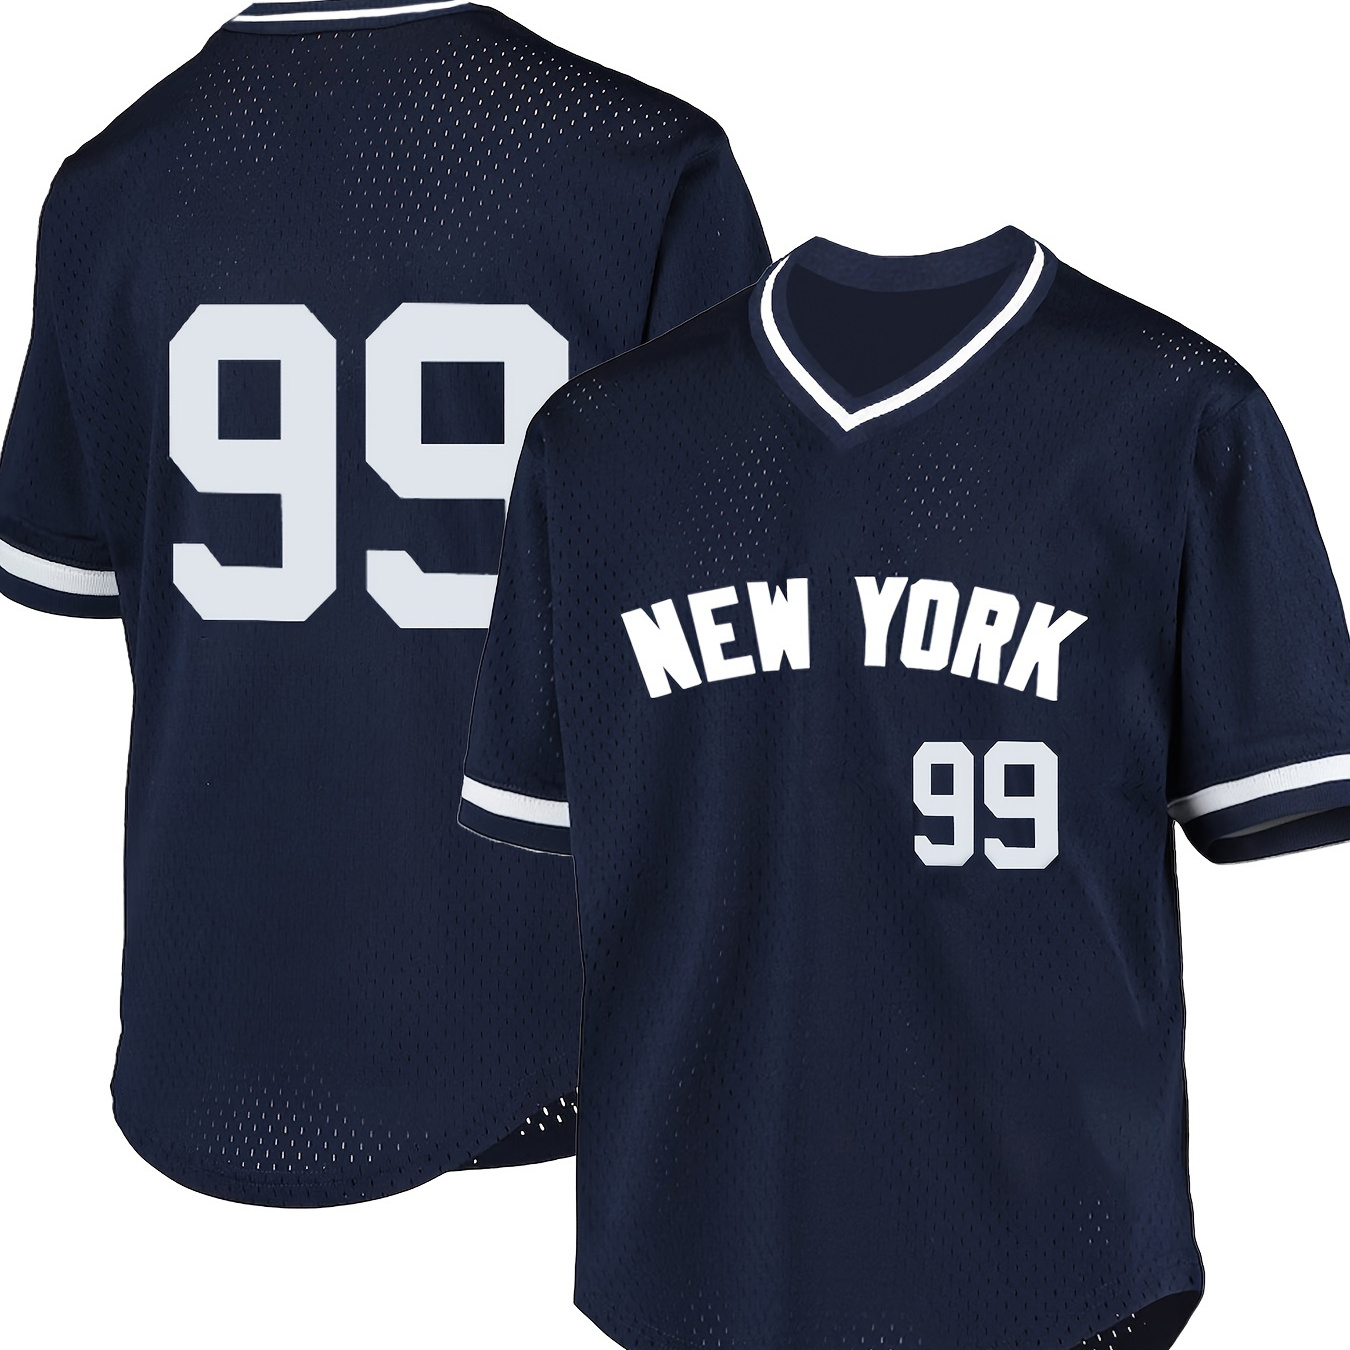 

Men's New York 99 Print Baseball Jersey, Active Breathable V Neck Short Sleeve Sports Shirt For Training Competition